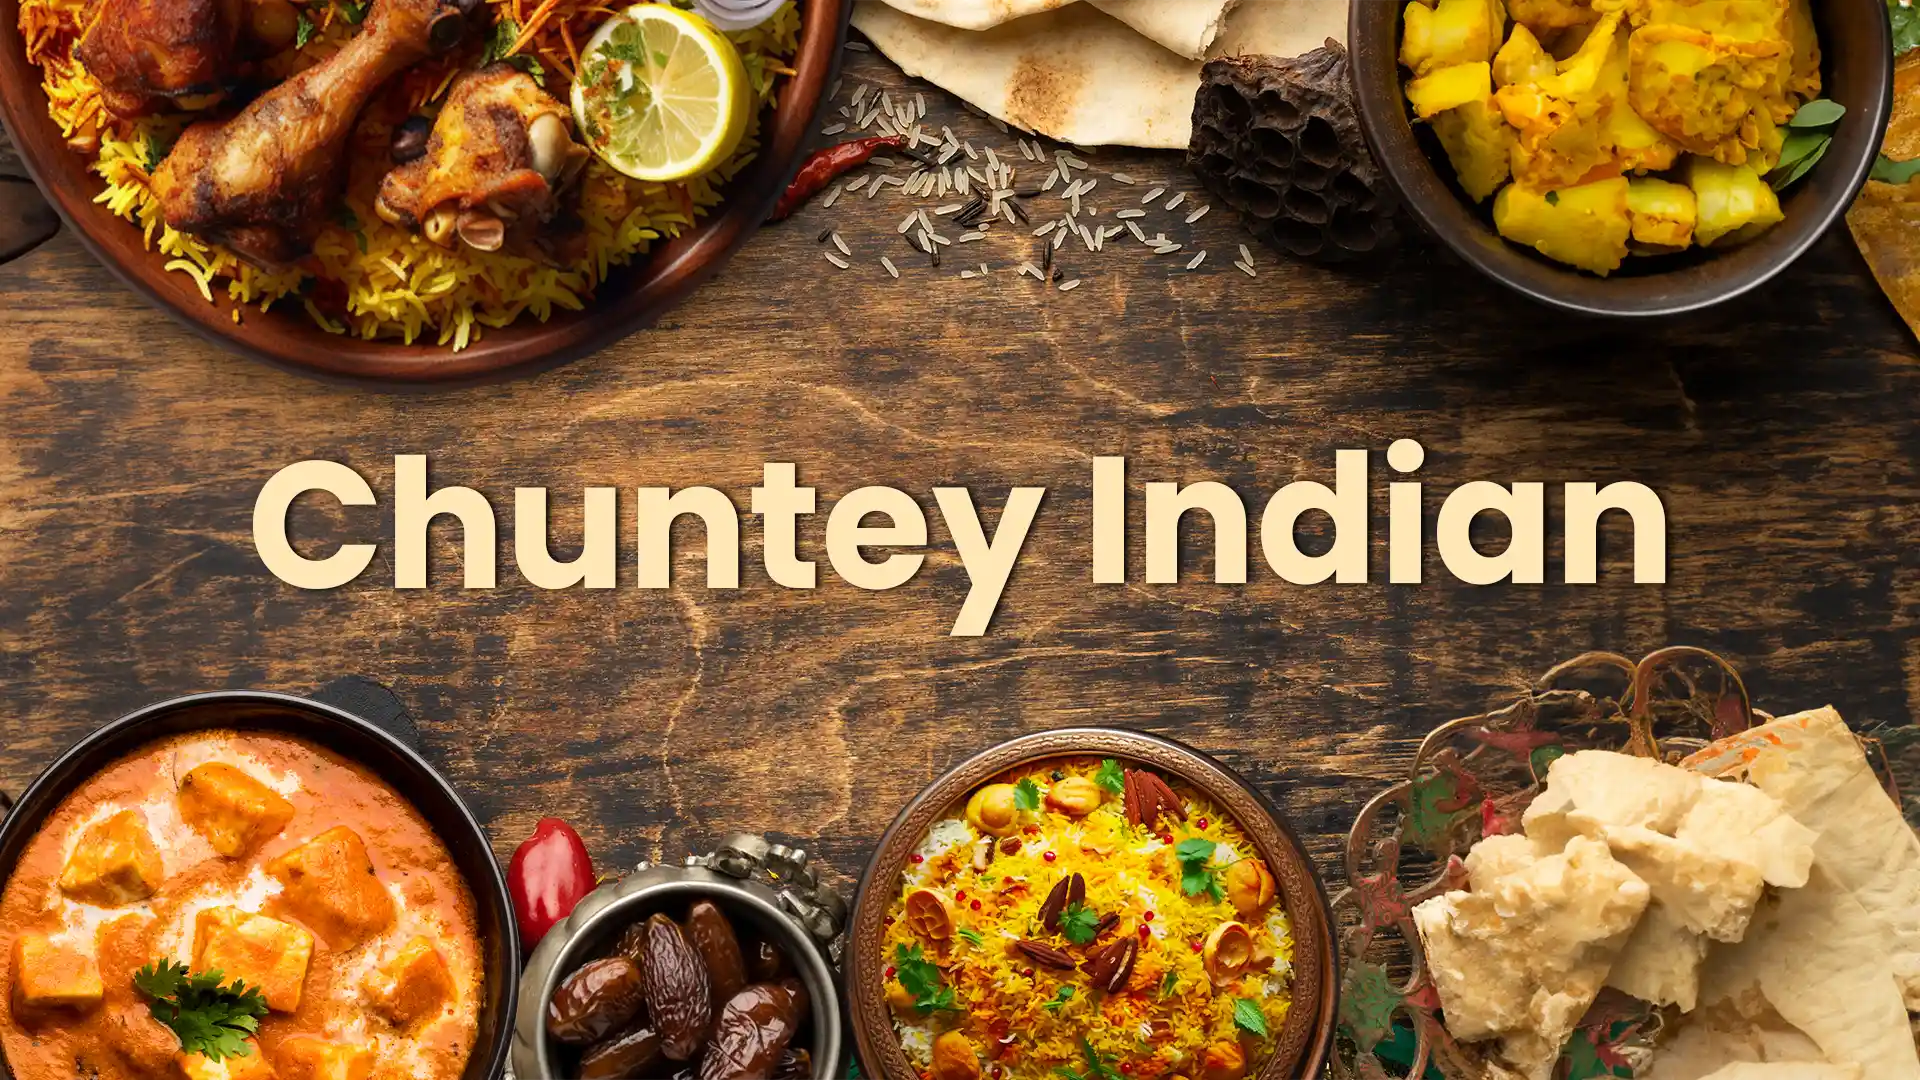 Sate your appetite for Indian food in Pattaya at Chutney Indian